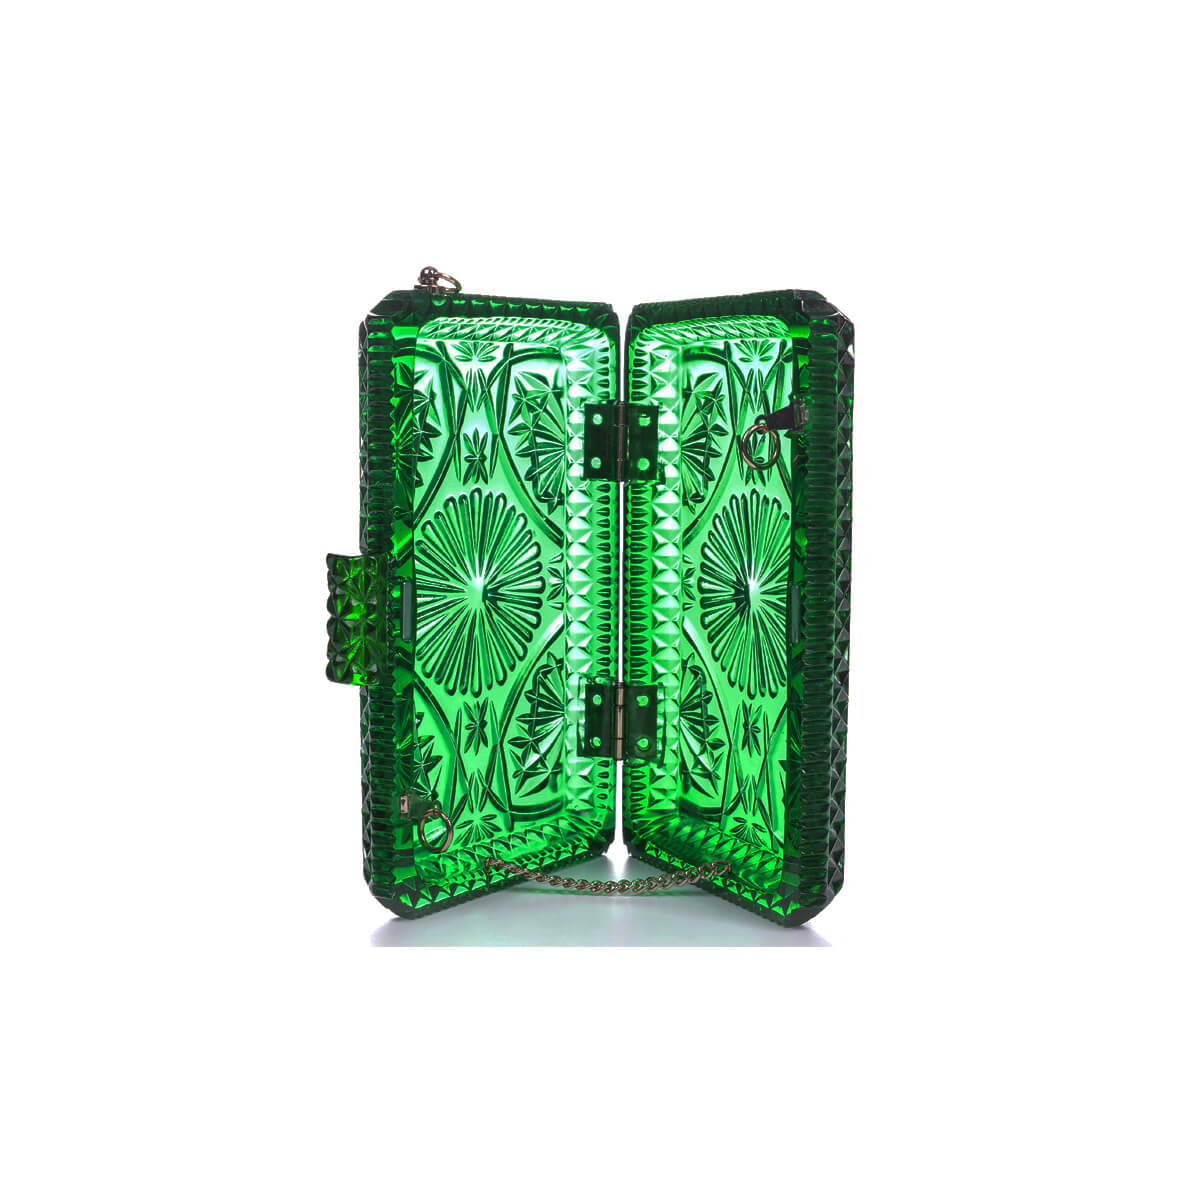 handmade vintage cut glass inspired clutch in green